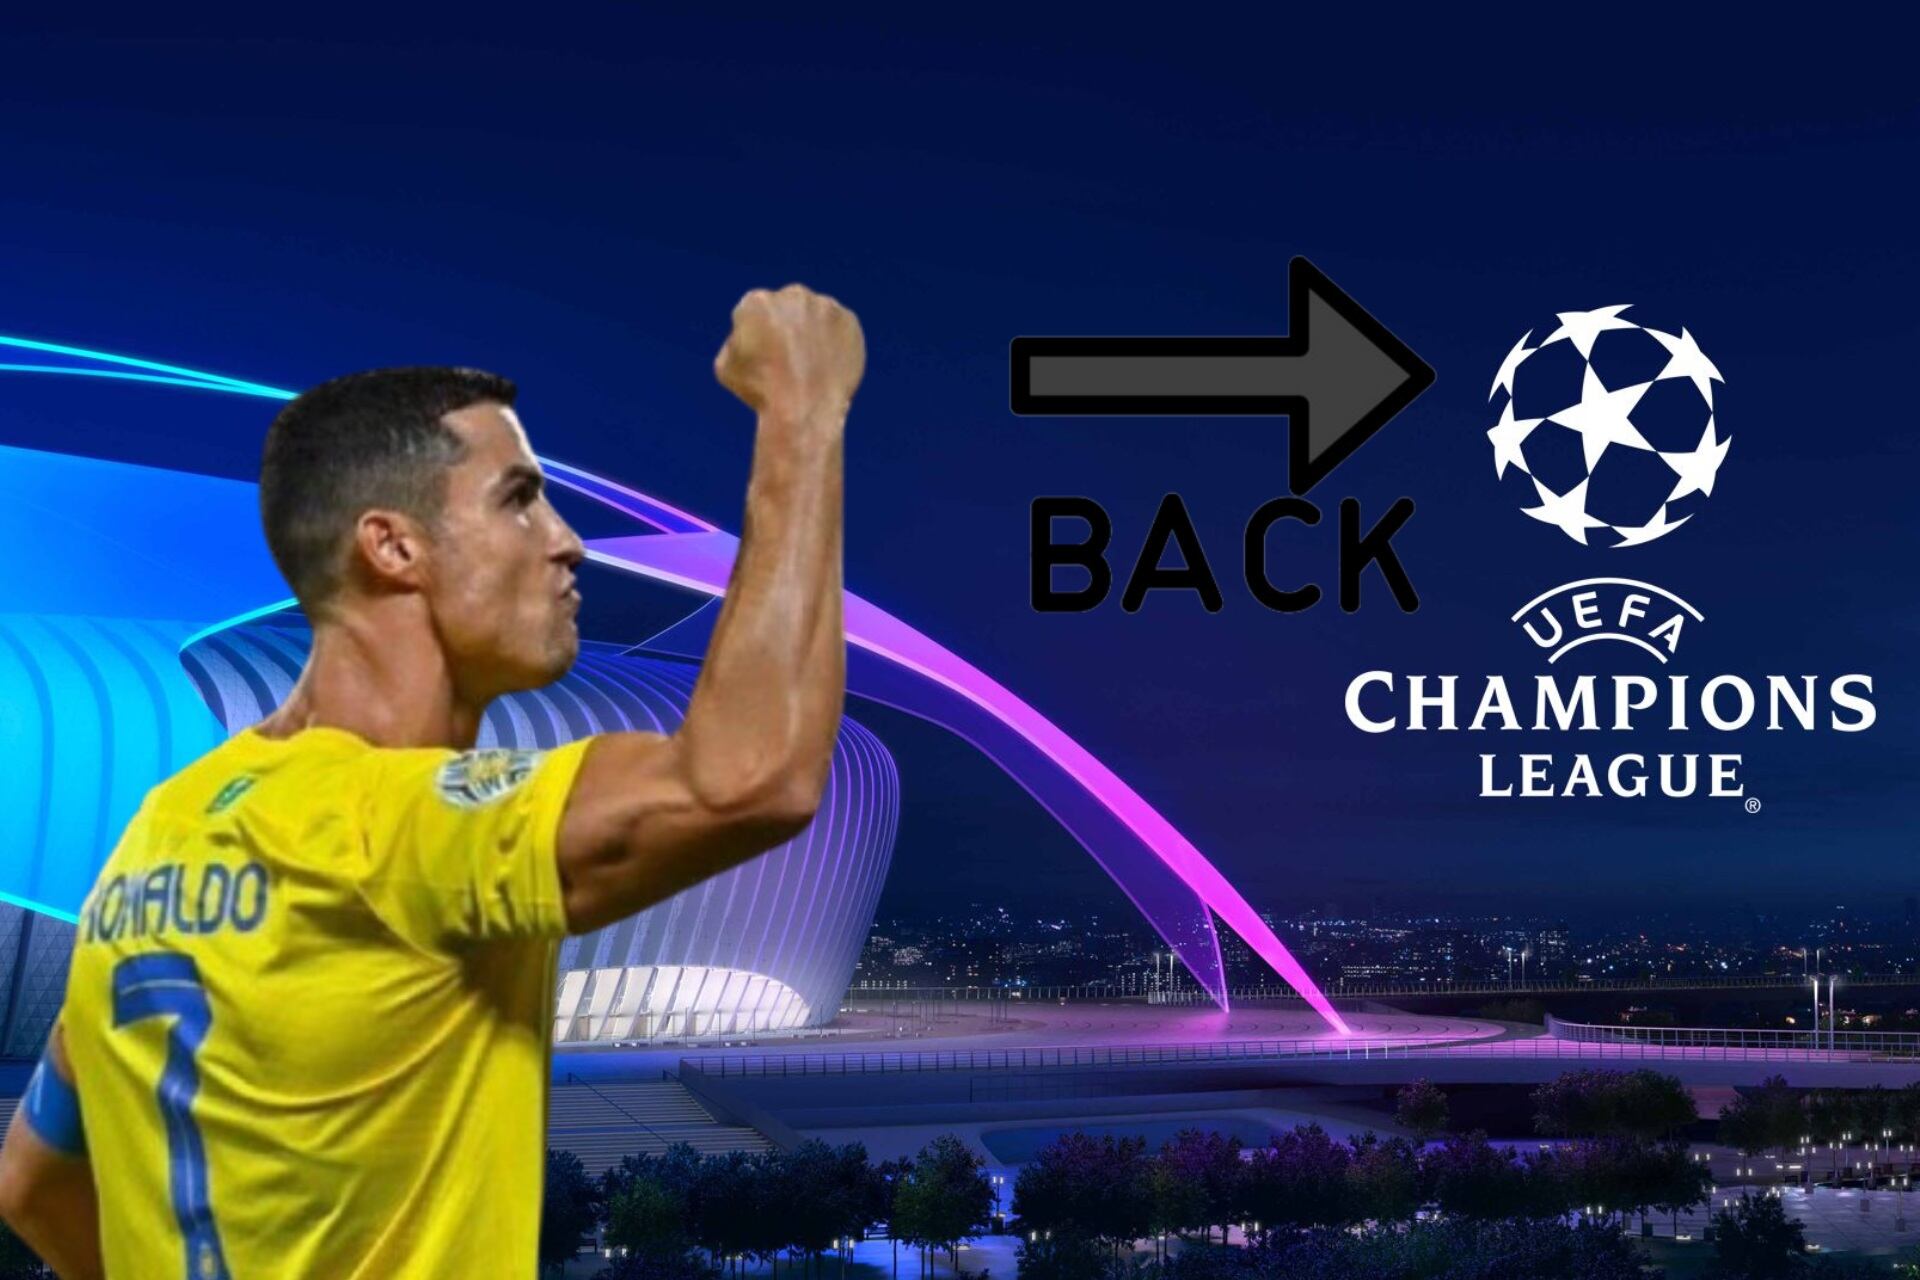 Cristiano Ronaldo returns to the Champions League? The pic that drove fans crazy